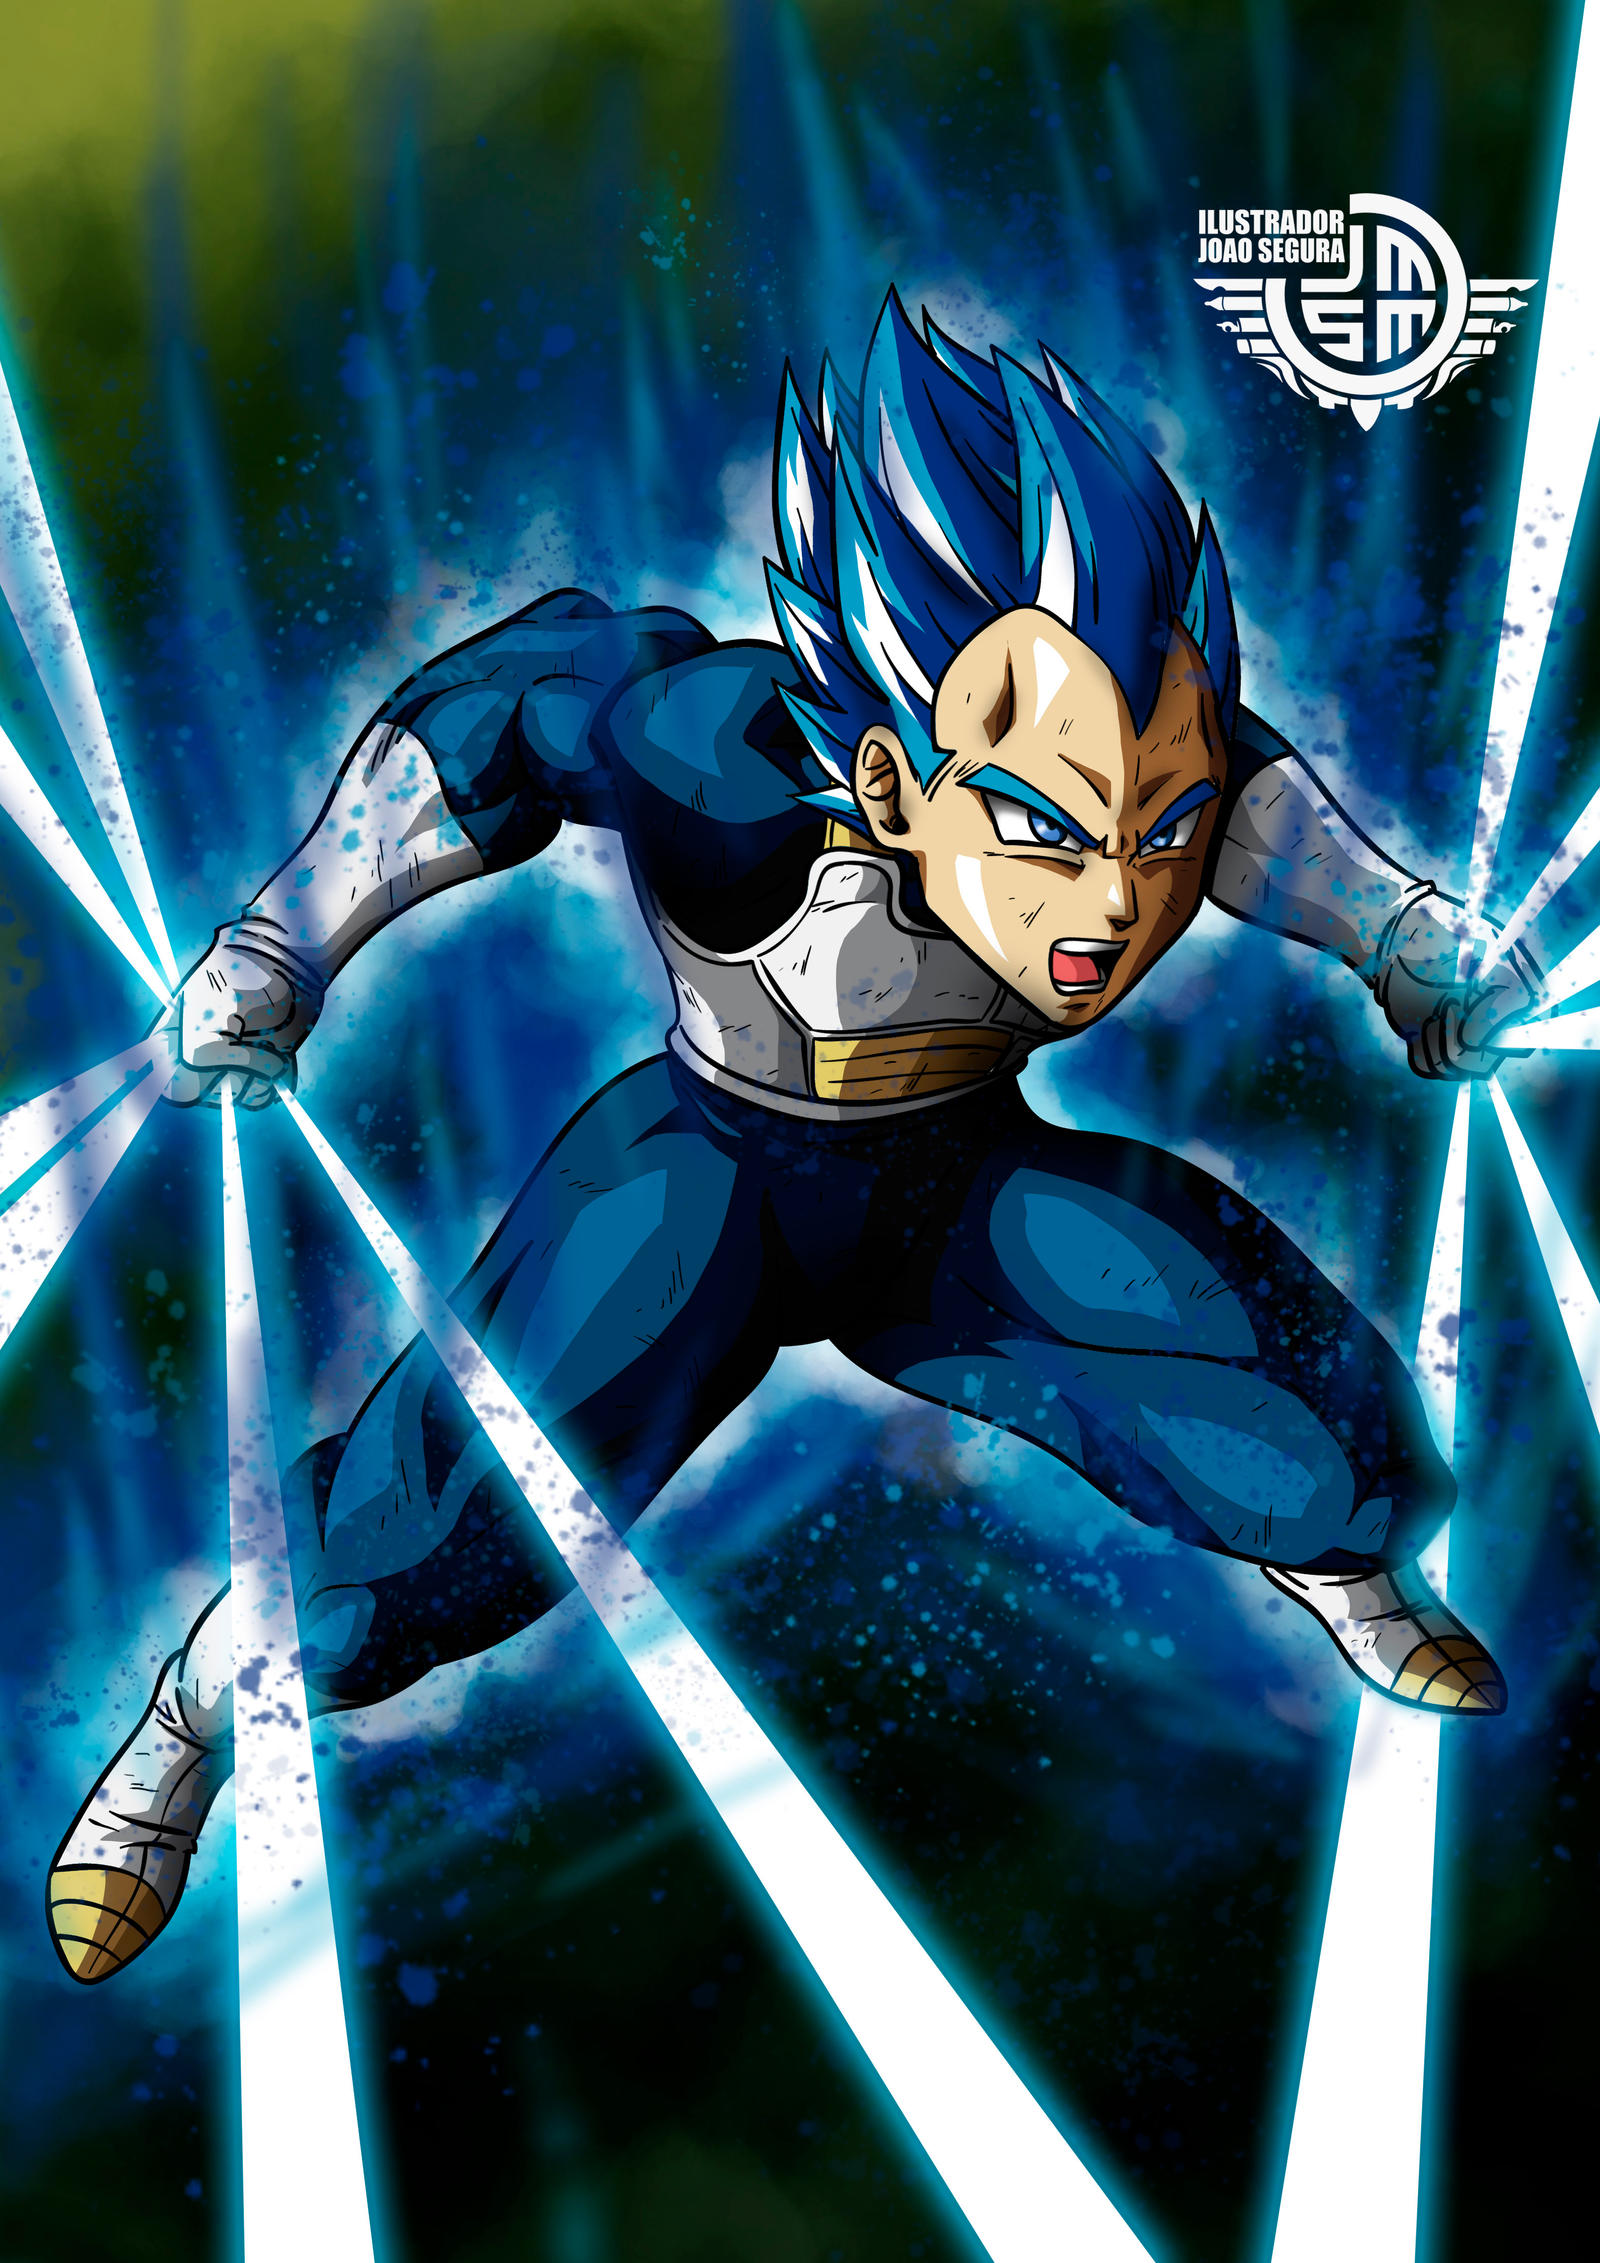 Vegeta's Final Flash by orco05 on DeviantArt